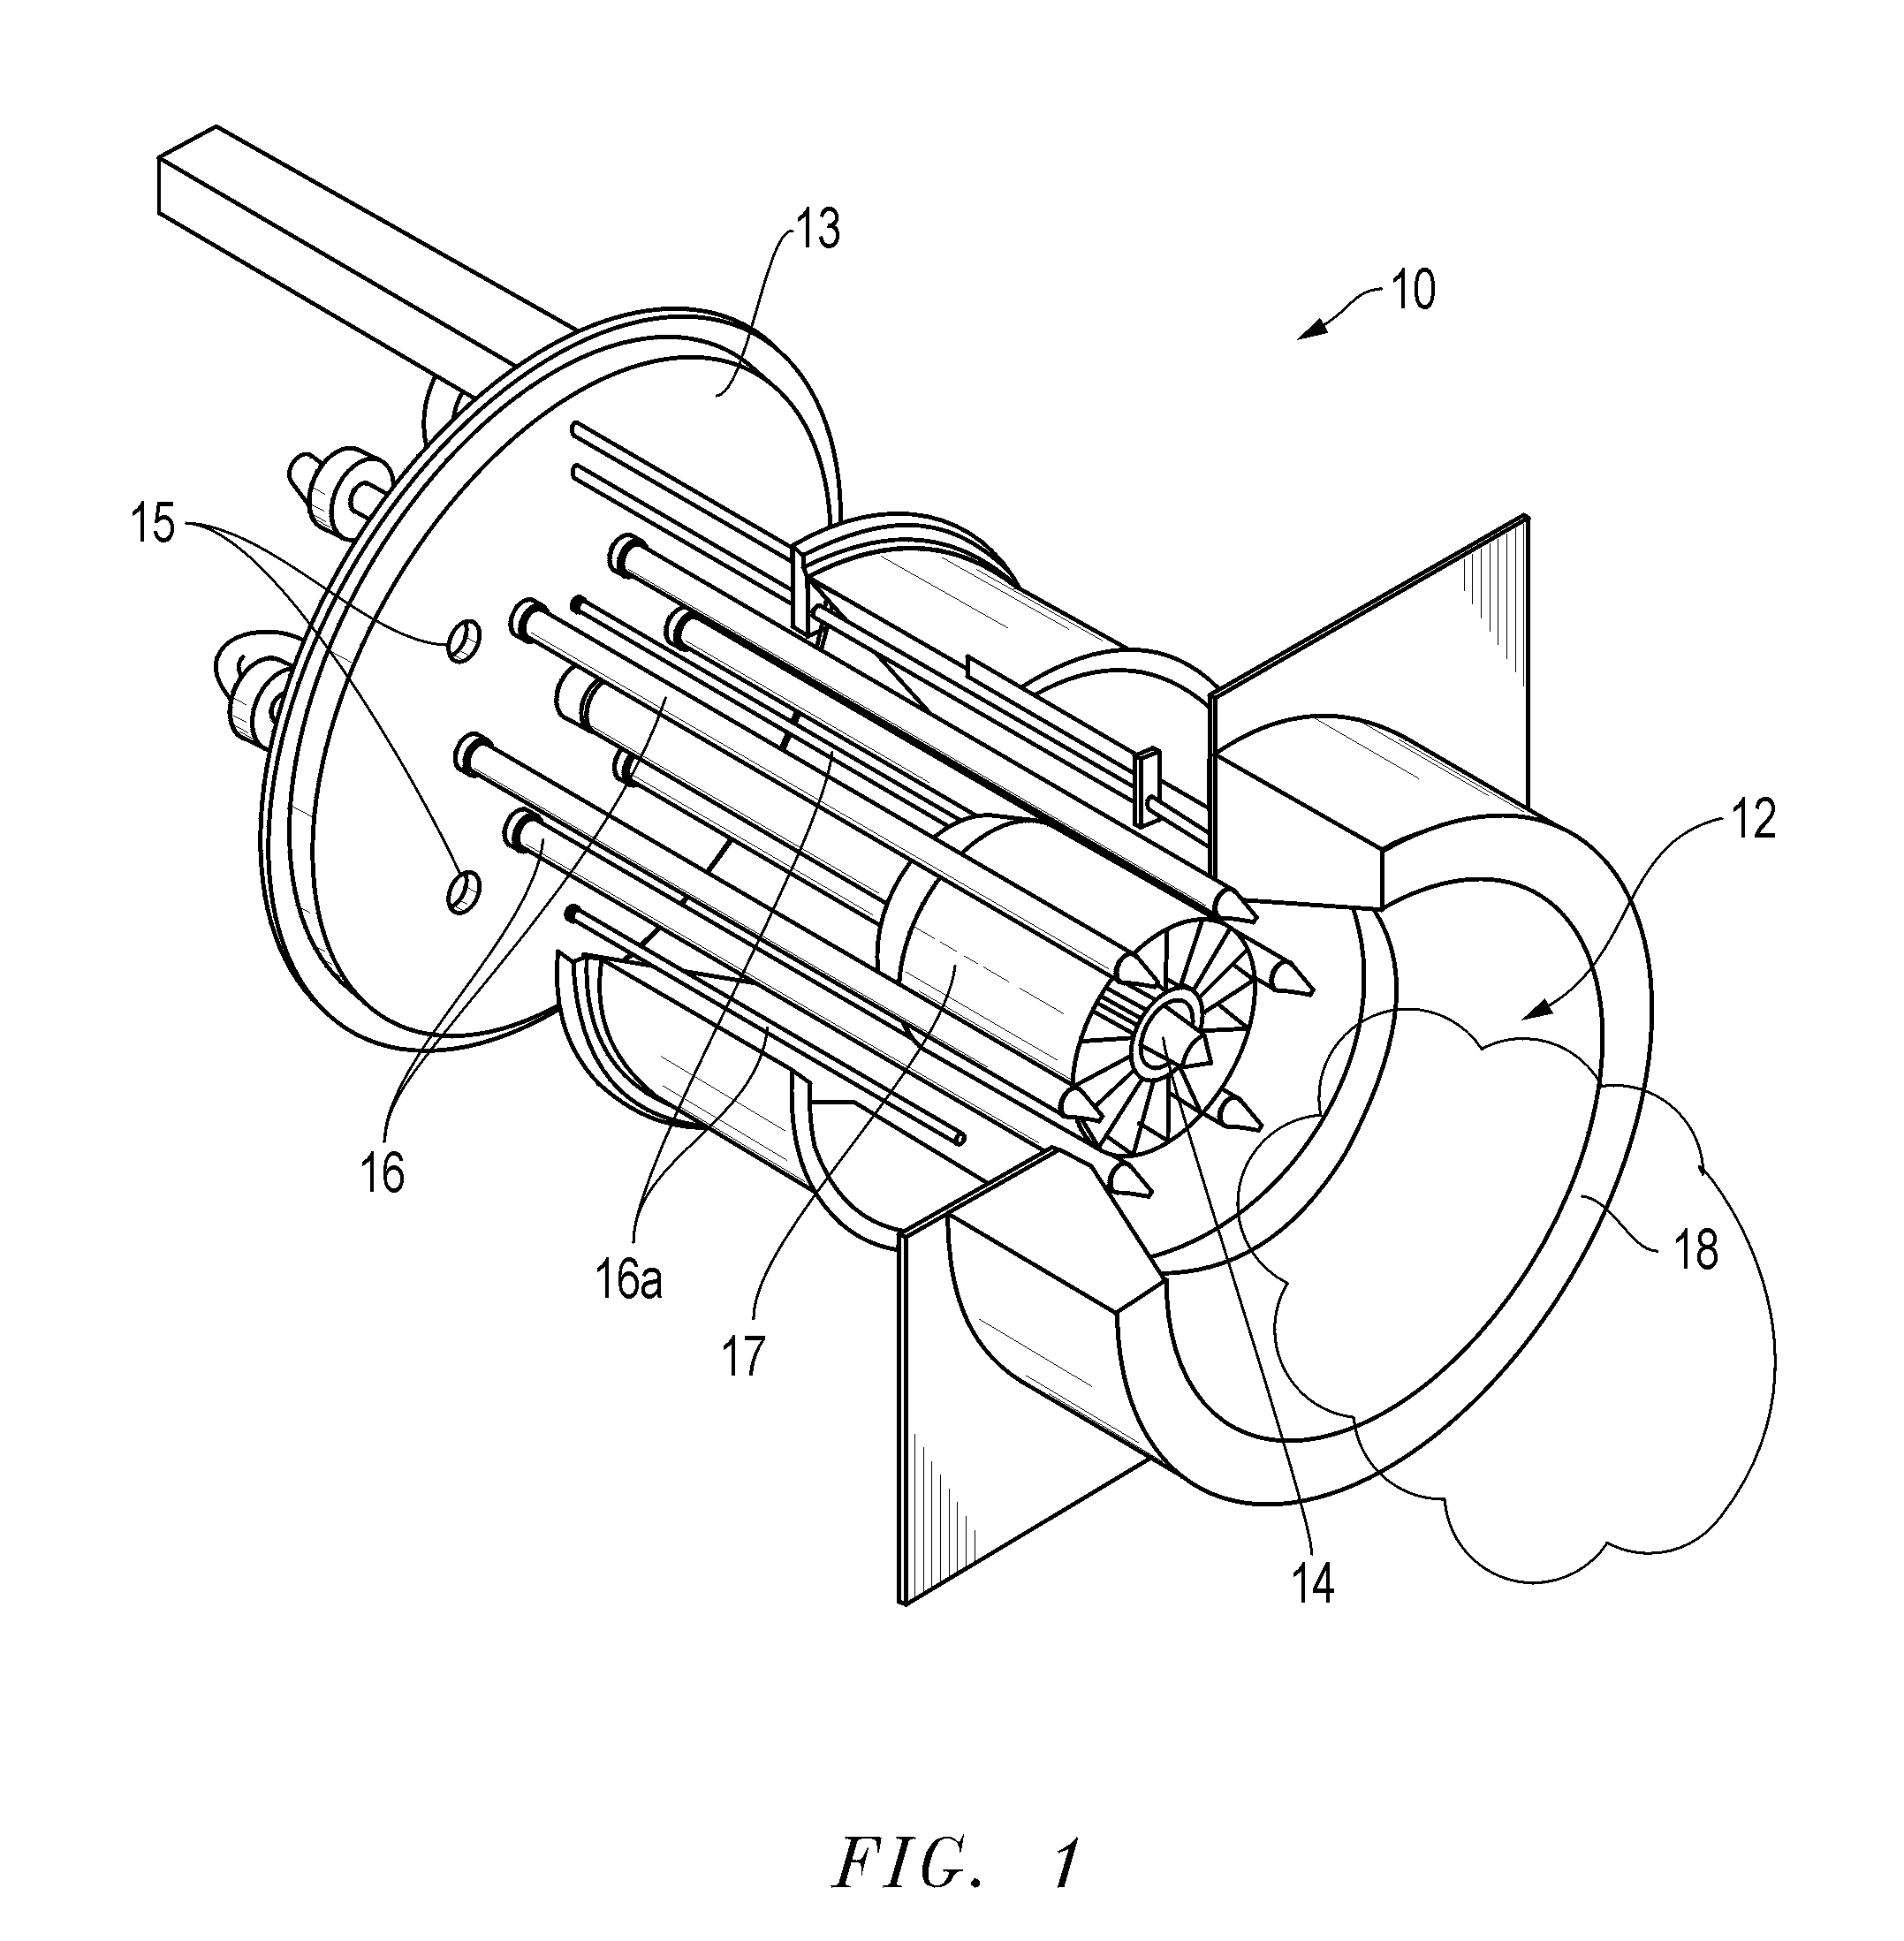 Methods, compositions, and burner systems for reducing emissions of carbon dioxide gas into the atmosphere